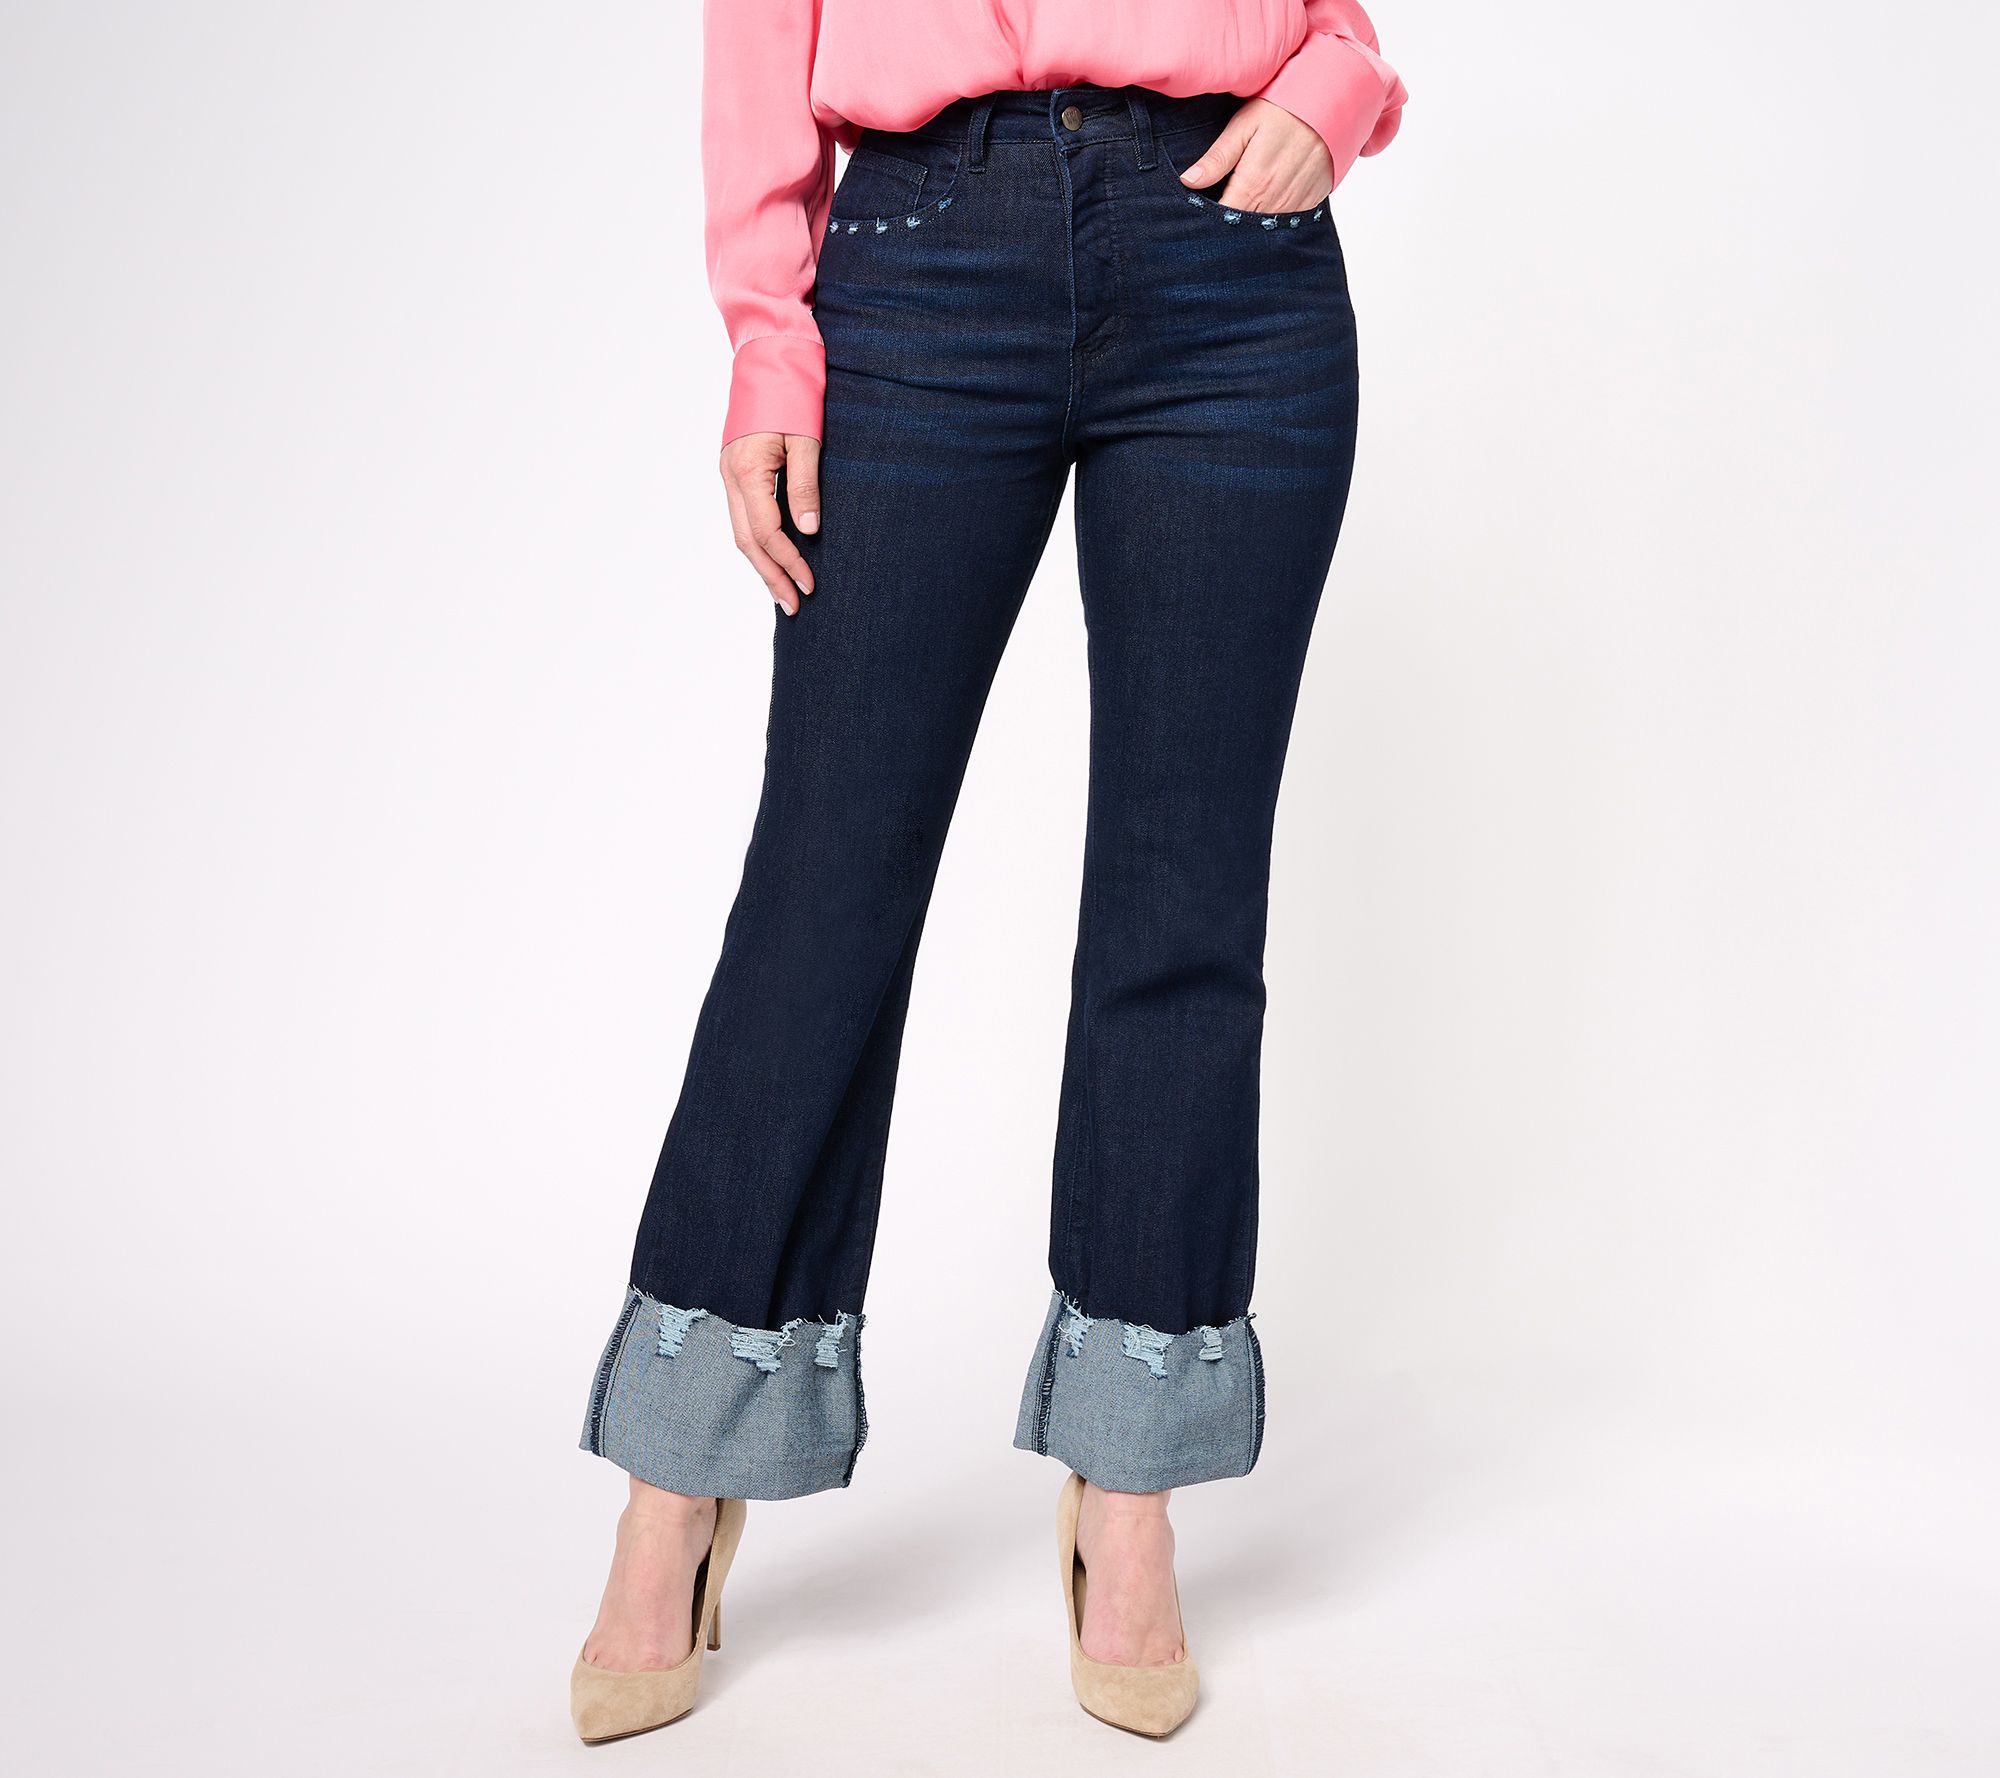 30 Best Outfit Ideas: How to Wear Flare Jeans - Be So You